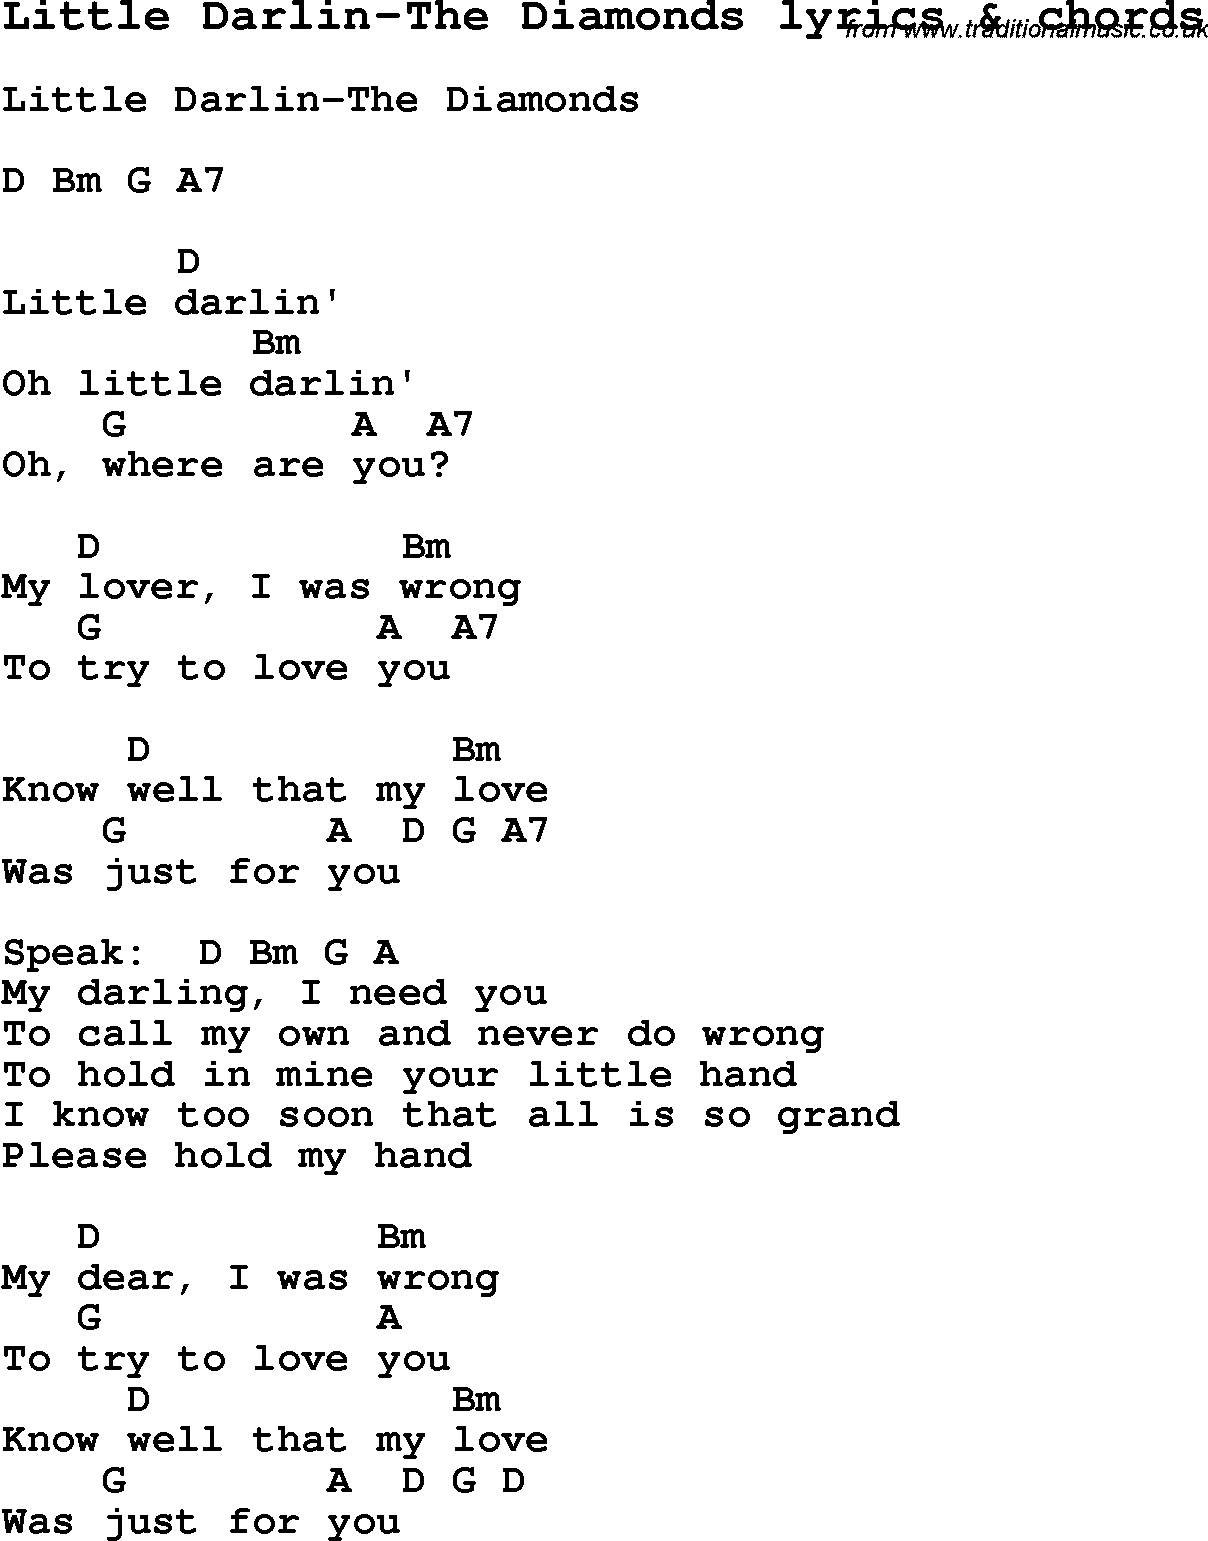 Love Song Lyrics For Little Darlin The Diamonds With Chords